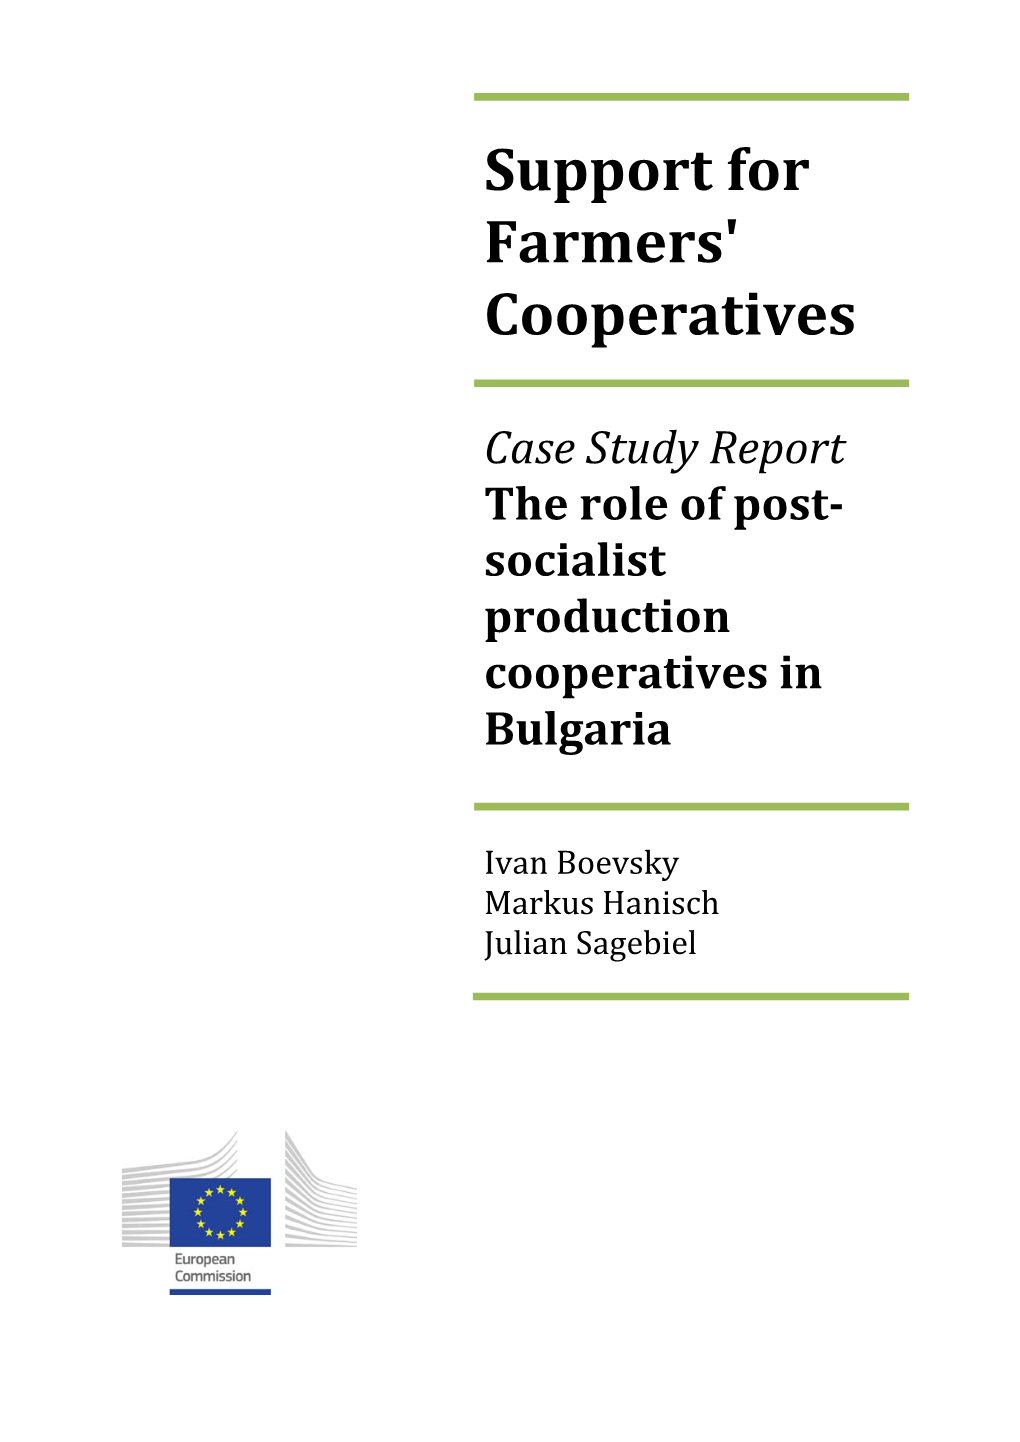 Support for Farmers' Cooperatives Case Study Report the Role of Post-Socialist Production Cooperatives in Bulgaria